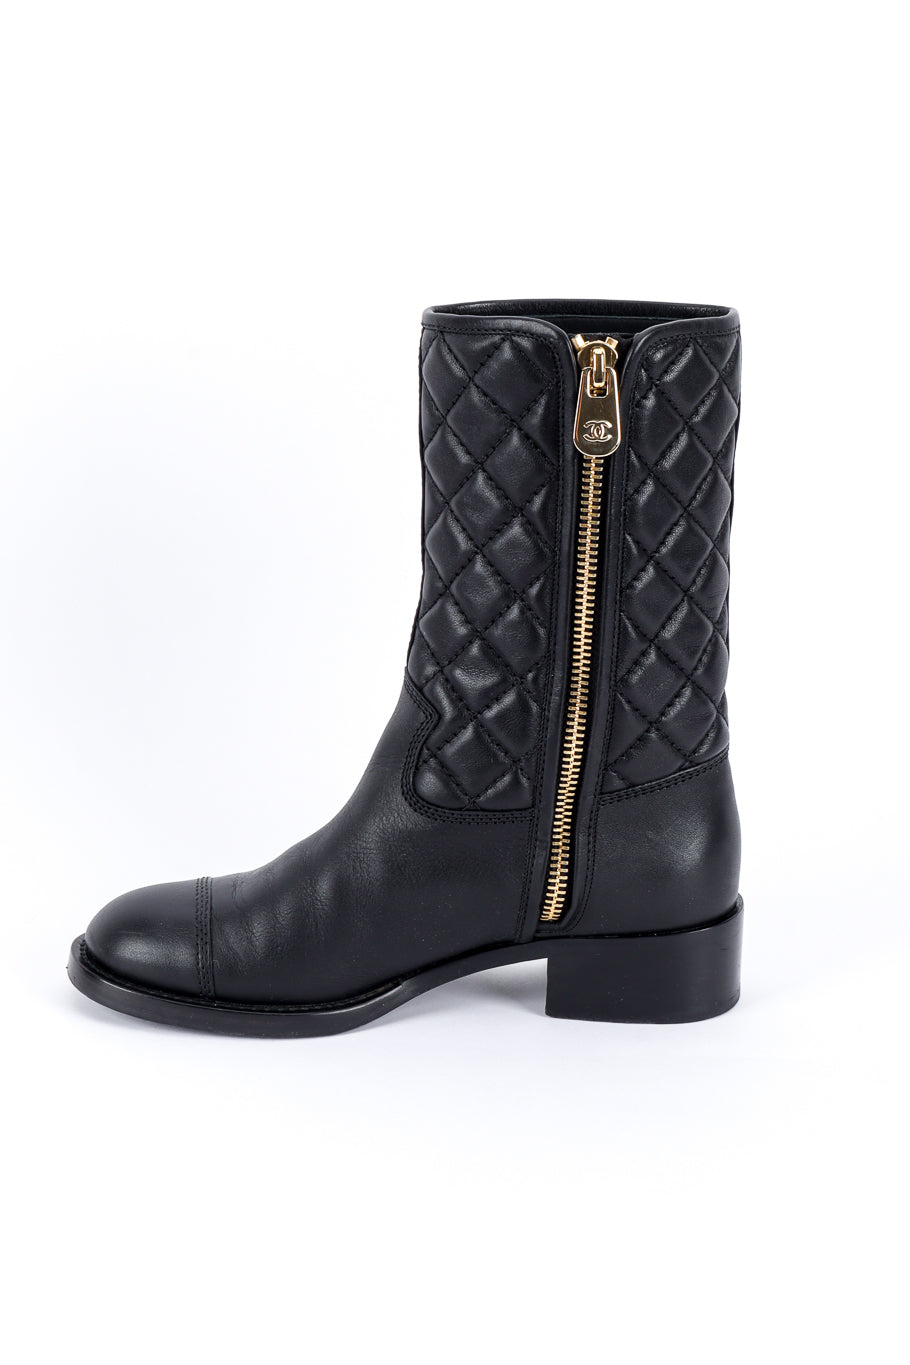 Chanel CC Quilted Mid-Calf Boots right shoe inner side @recess la